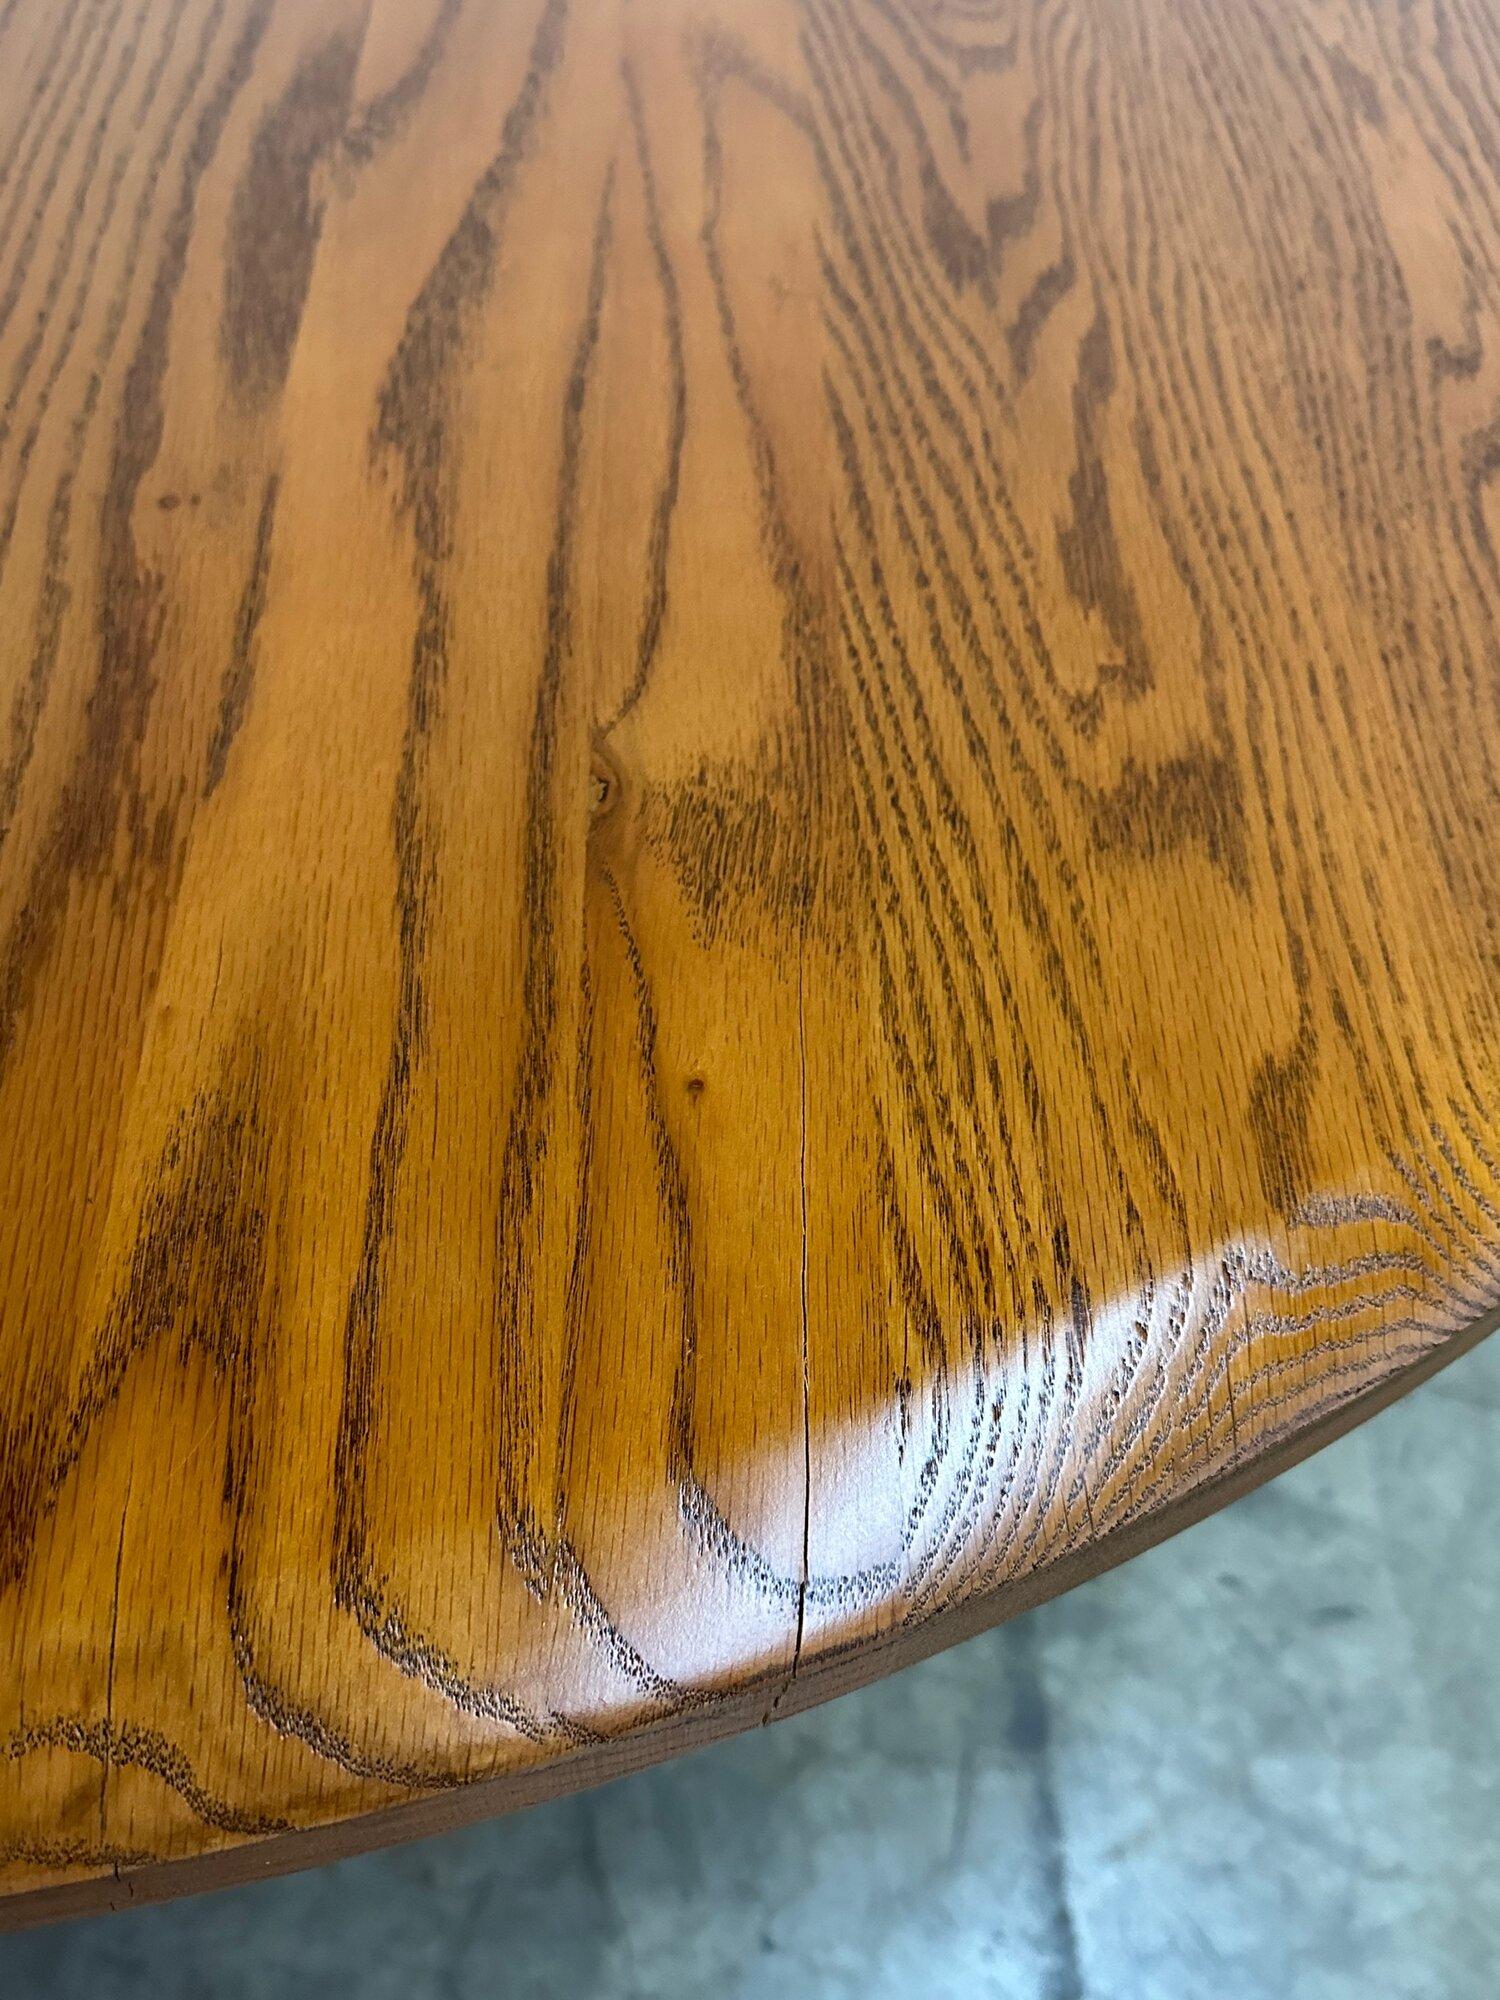 W53 H29.5 KC28

Exceptionally made contemporary solid wood ENZO dining by Six penny. Table is in like new condition used for staging only. Item has no major areas of wear but has NOT been refinished in house. Item is being sold in as is good